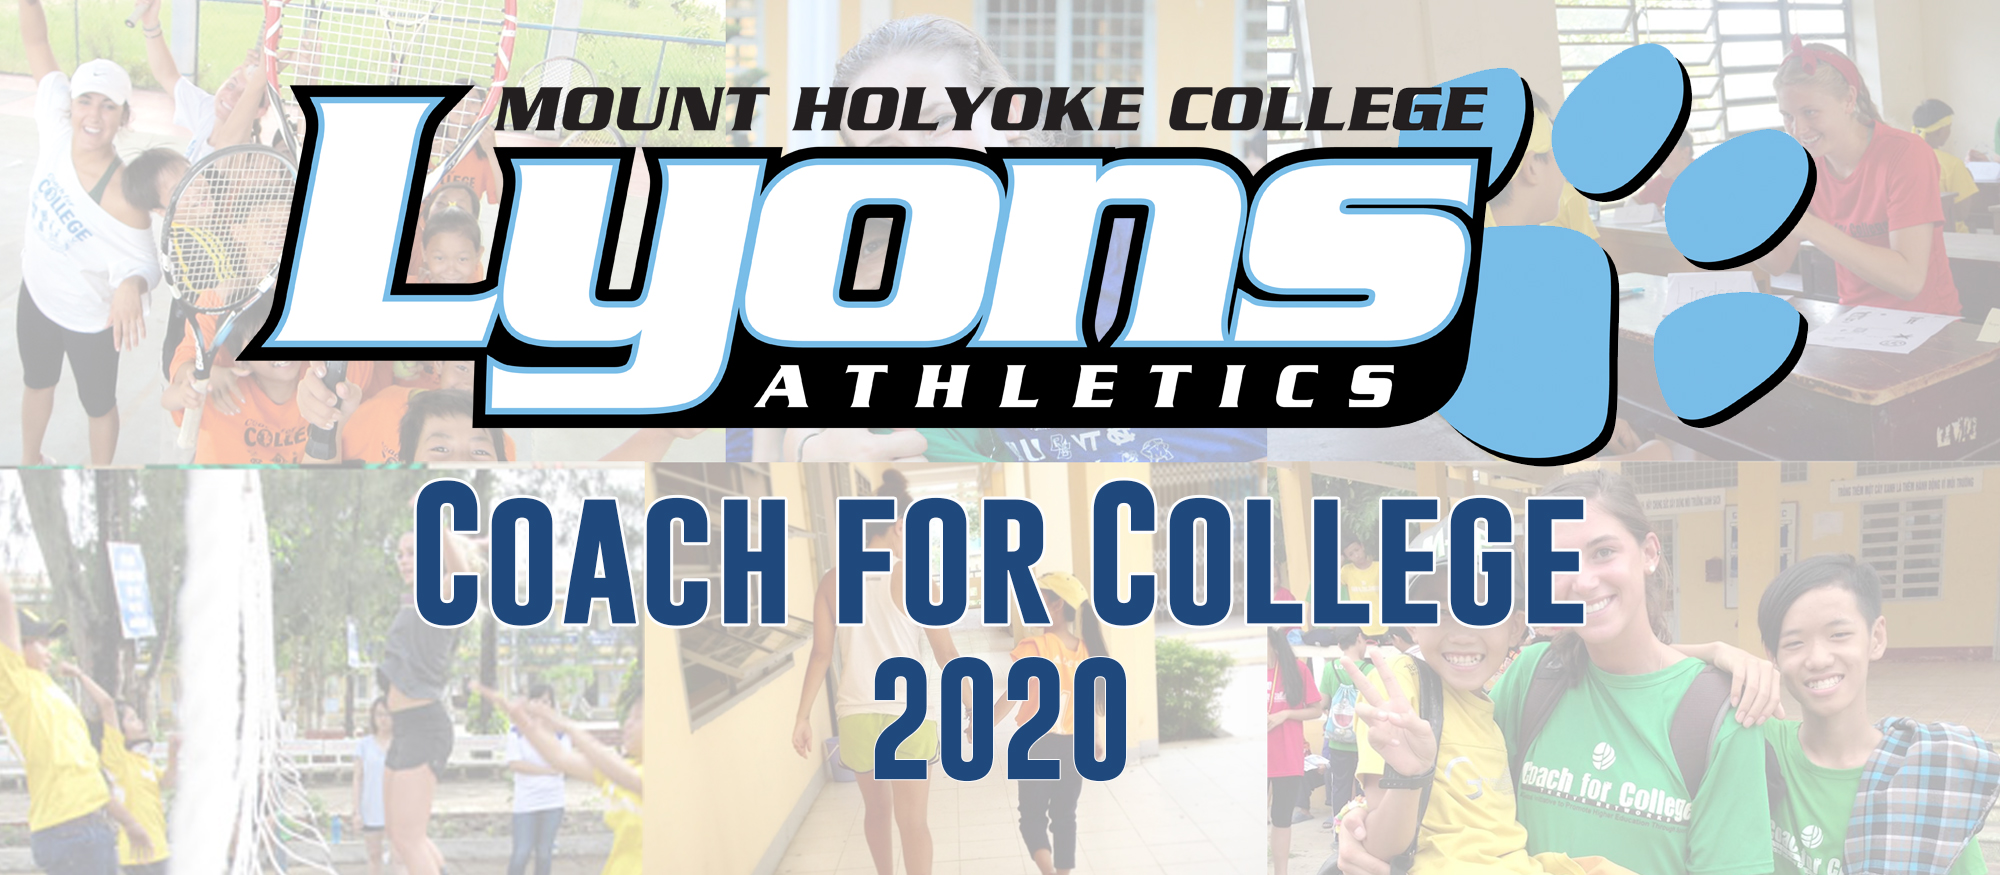 Applications Open for 2020 Coach for College Program at Mount Holyoke College